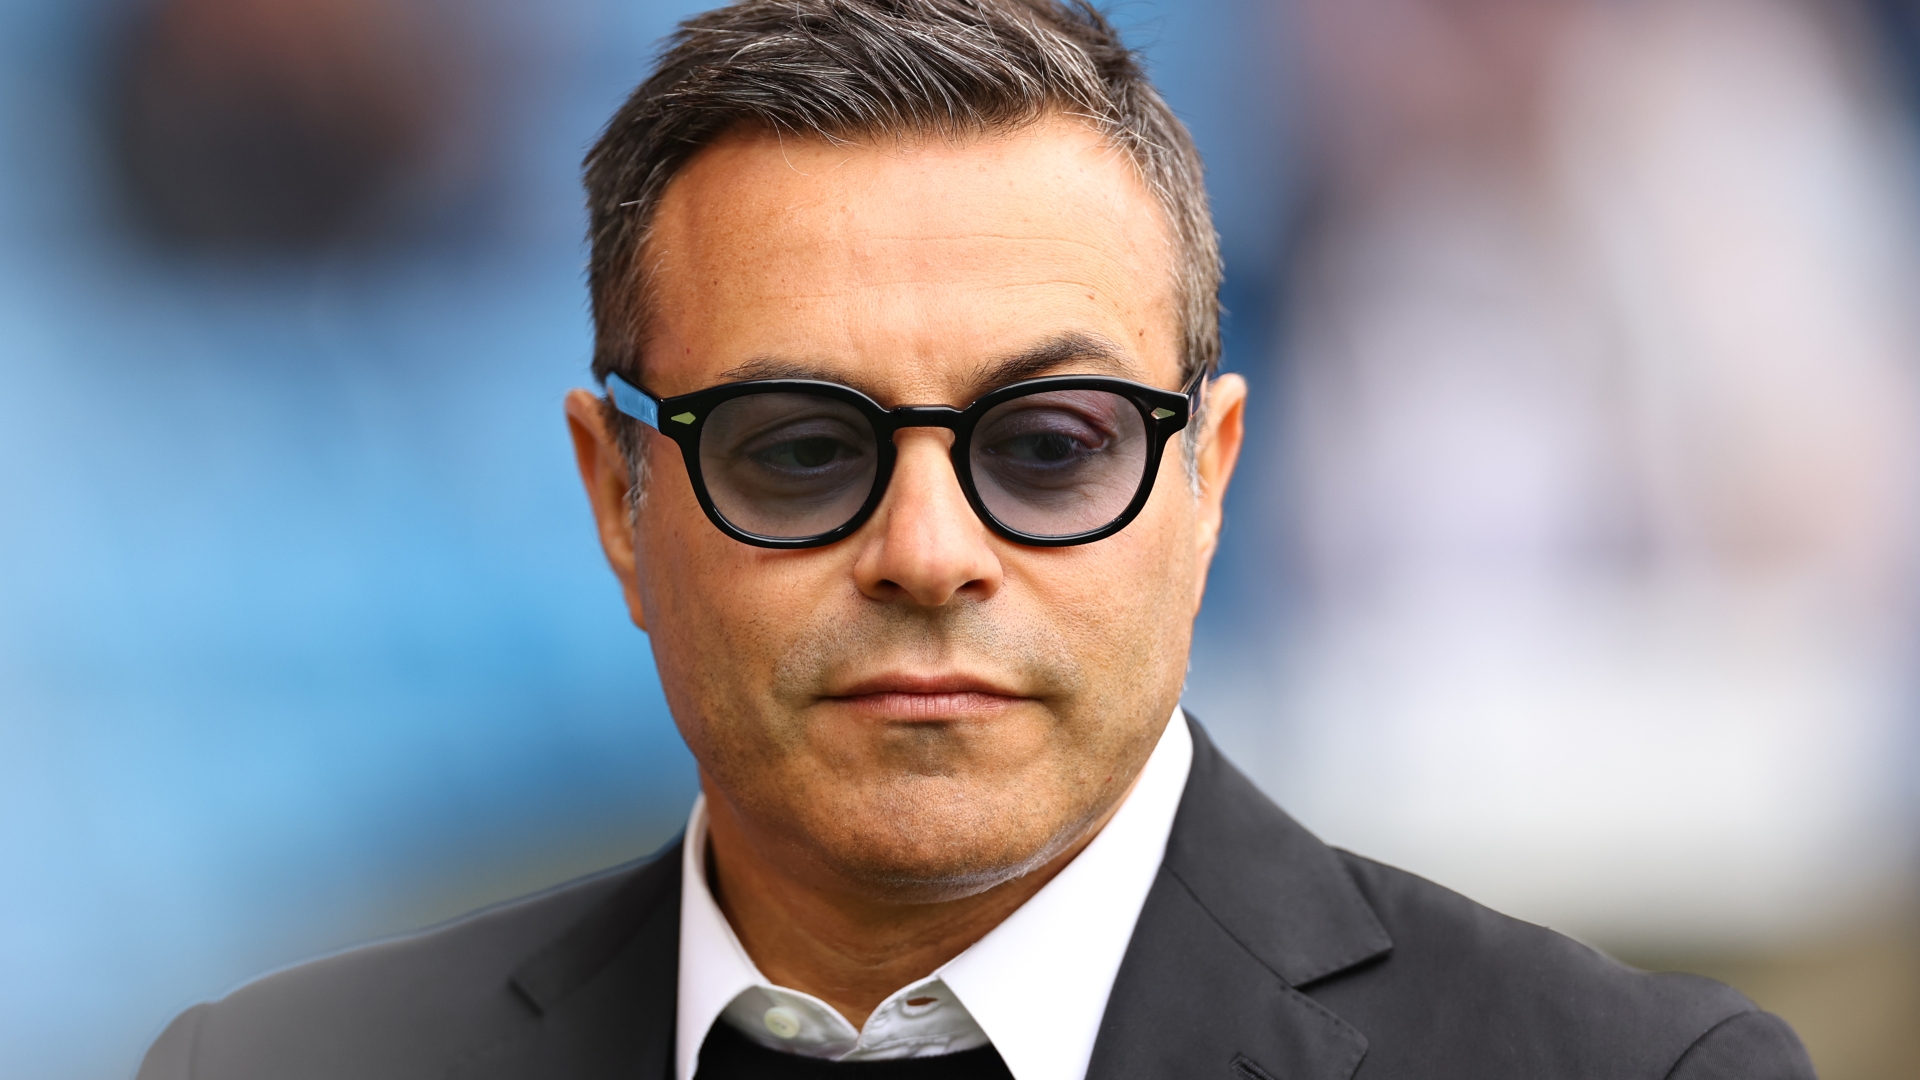 Andrea Radrizzani 'agrees' to terms of Leeds sale to San Francisco 49ers investment fund